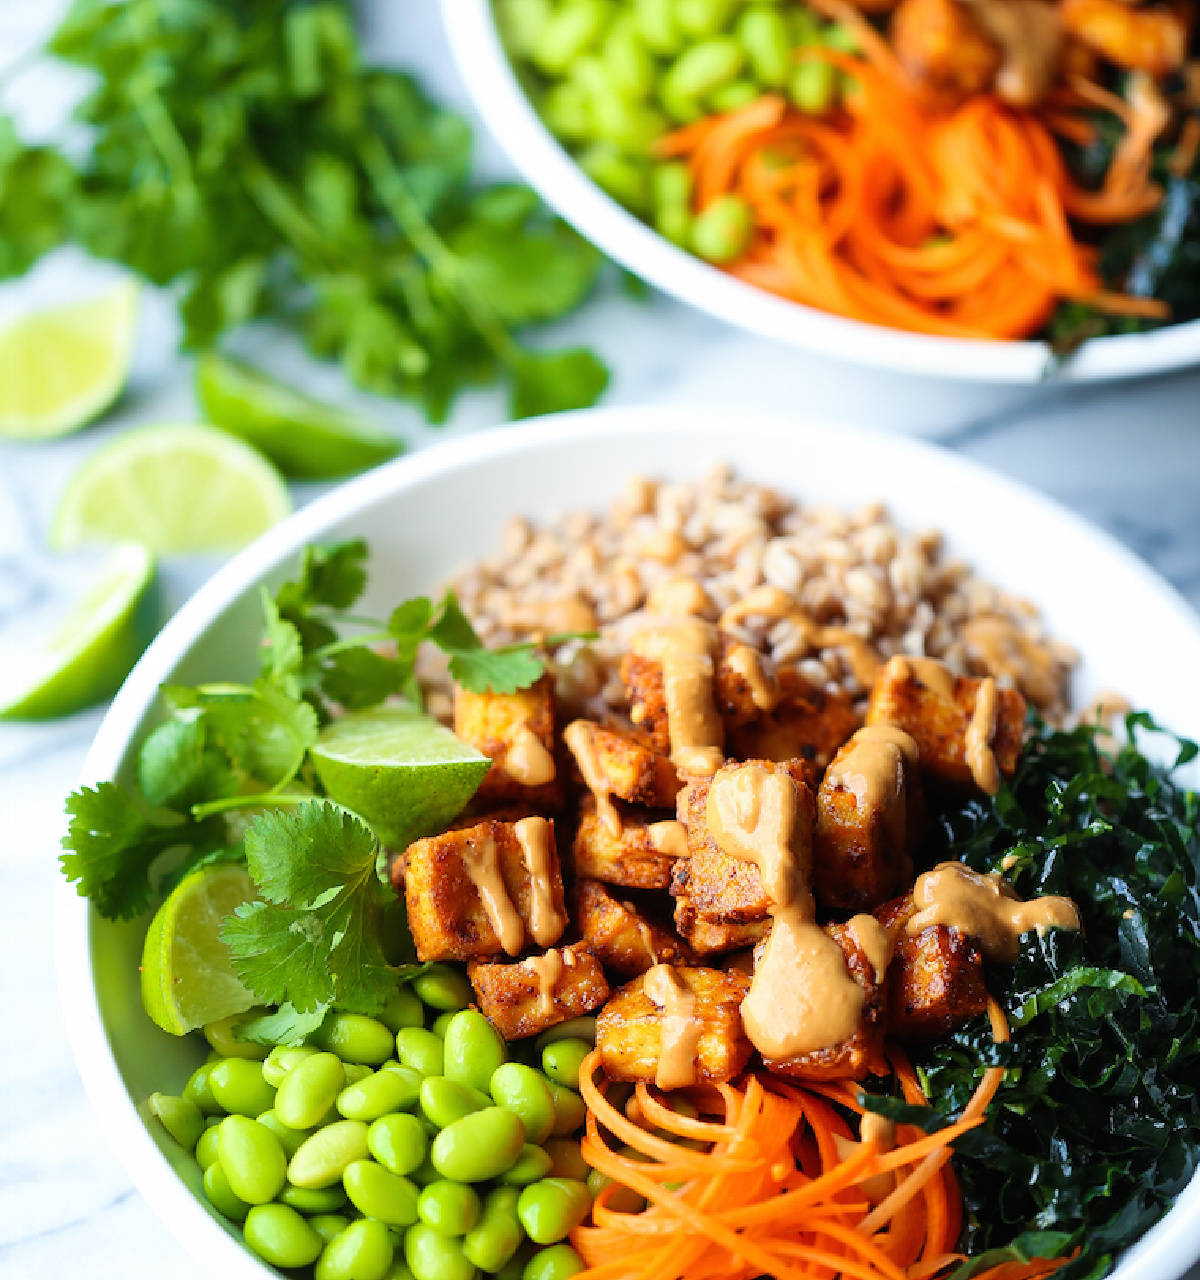 7 Super Delicious Tofu Recipes That Are Healthy and Easy - It's A Zesty